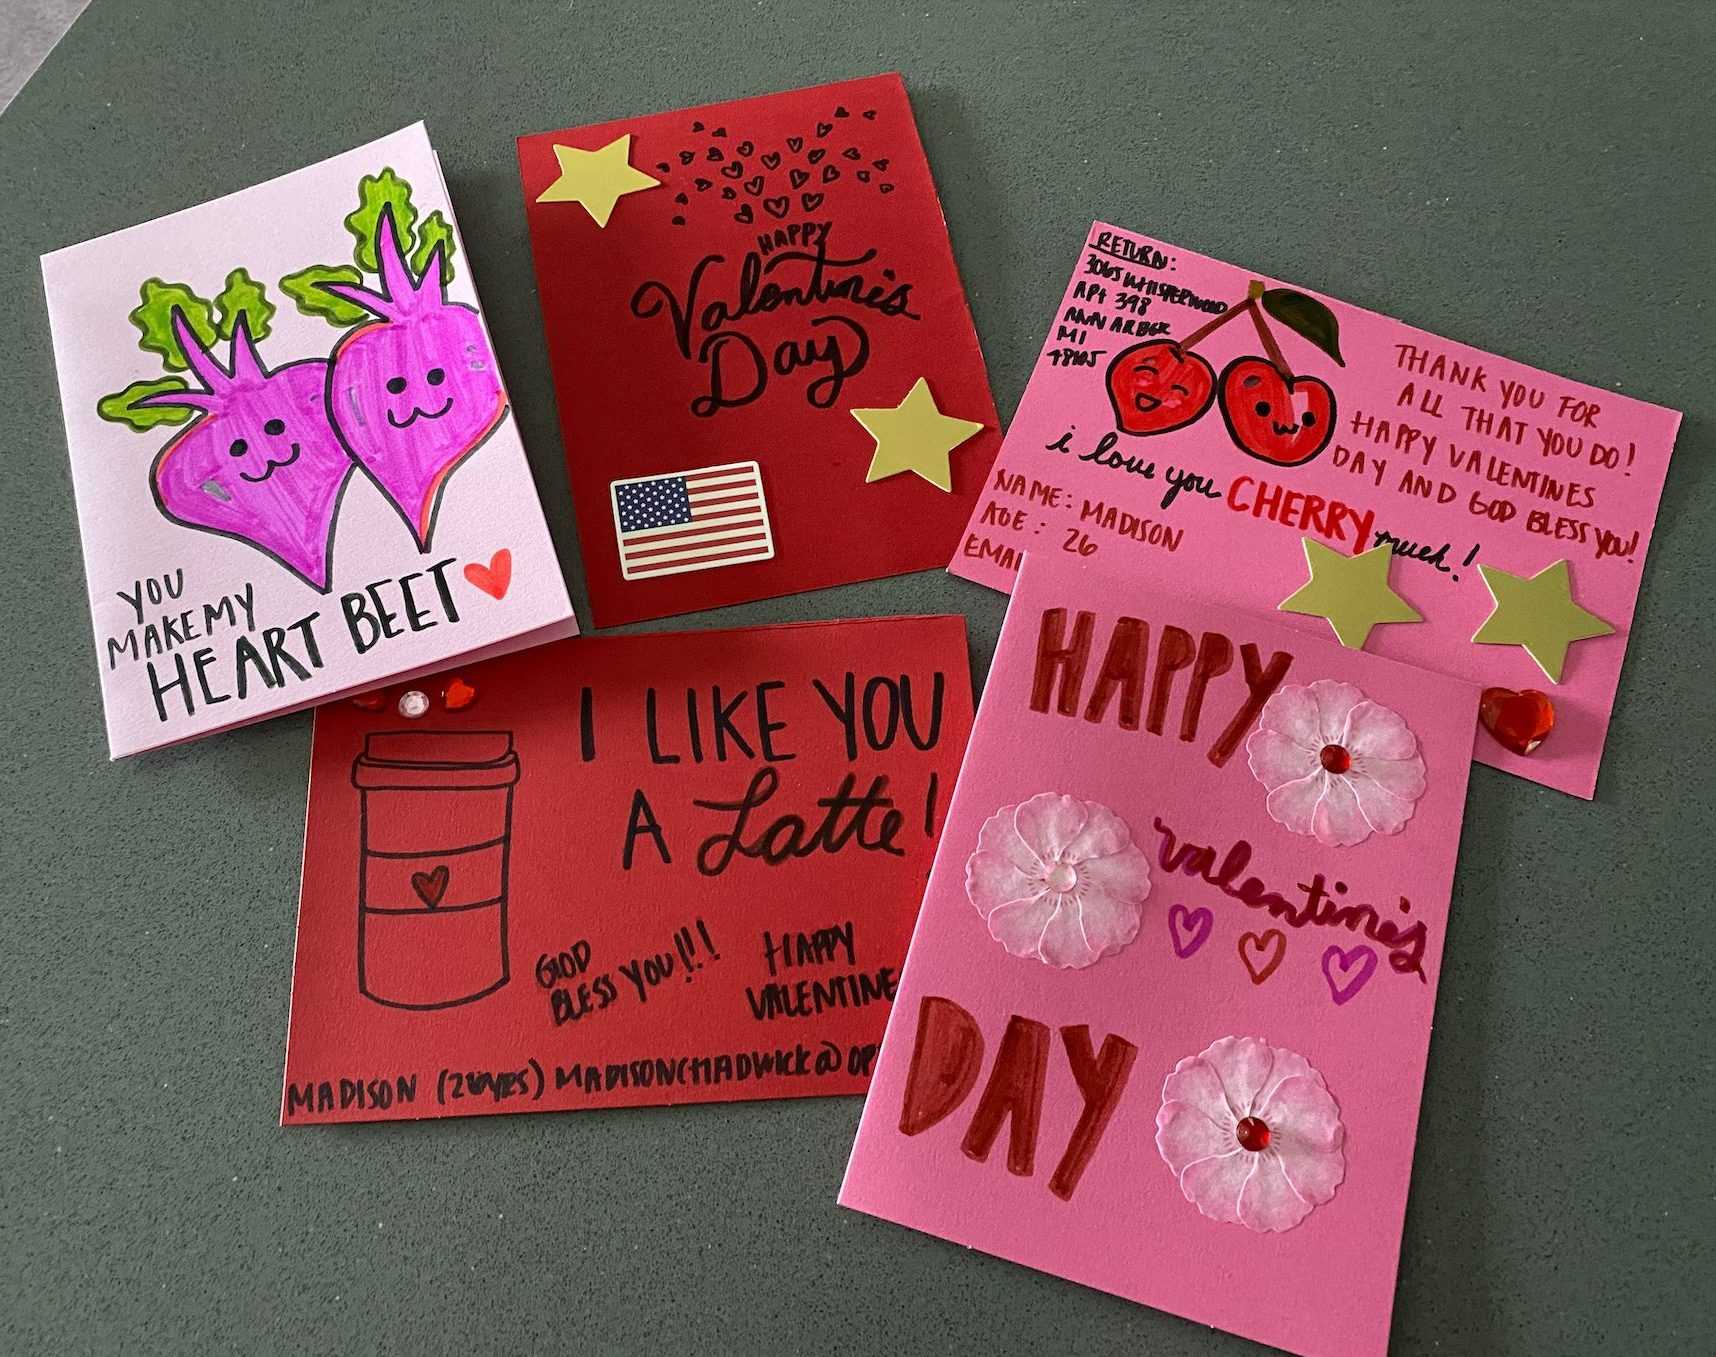 Optomi Detroit Gives Back to Military Men & Women by Writing Valentine’s Day Cards to Thank Them for Their Service